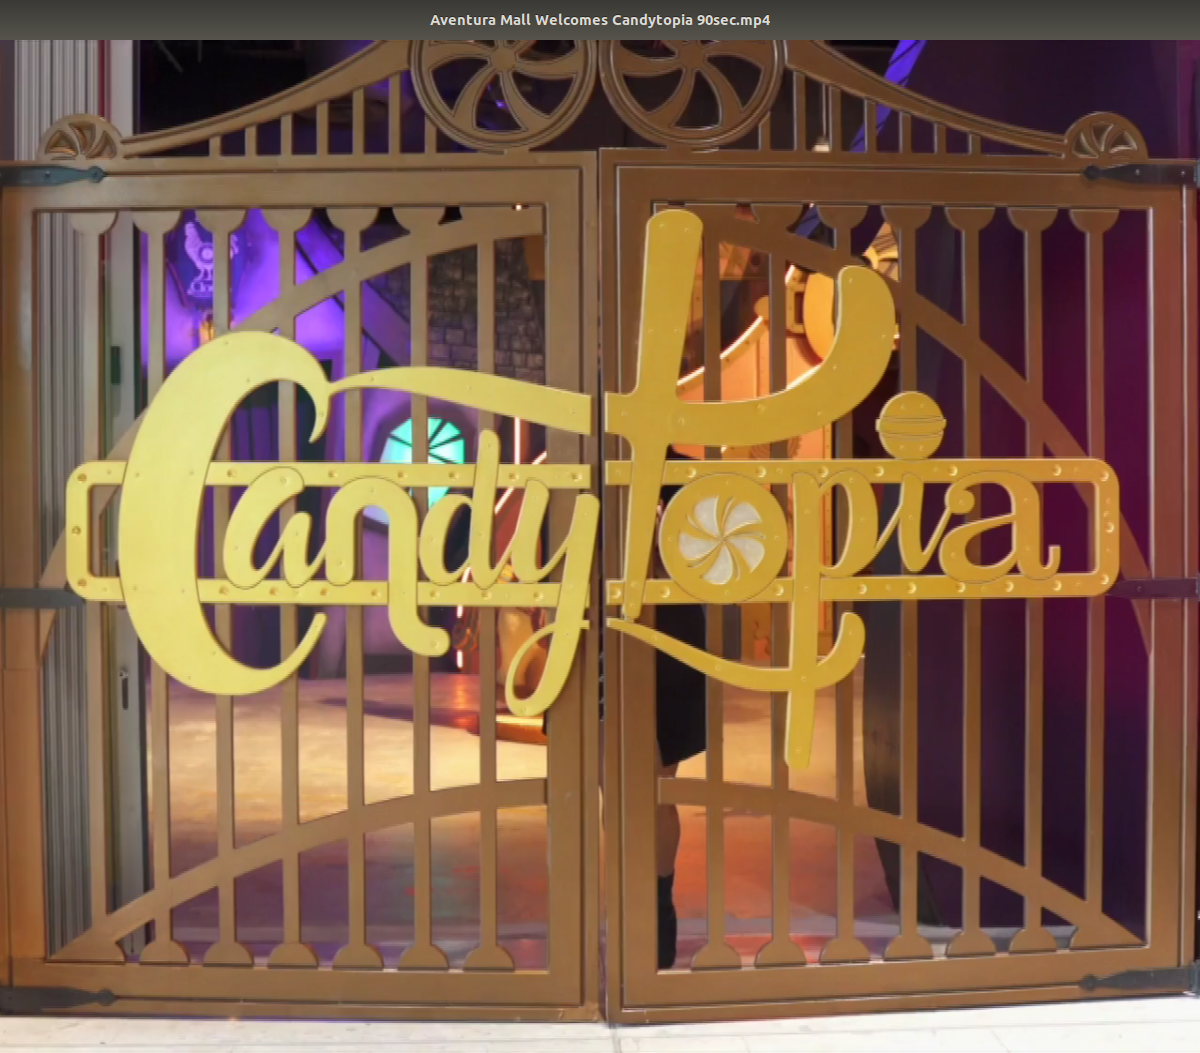 Aventura Mall Welcomes Candytopia 90sec